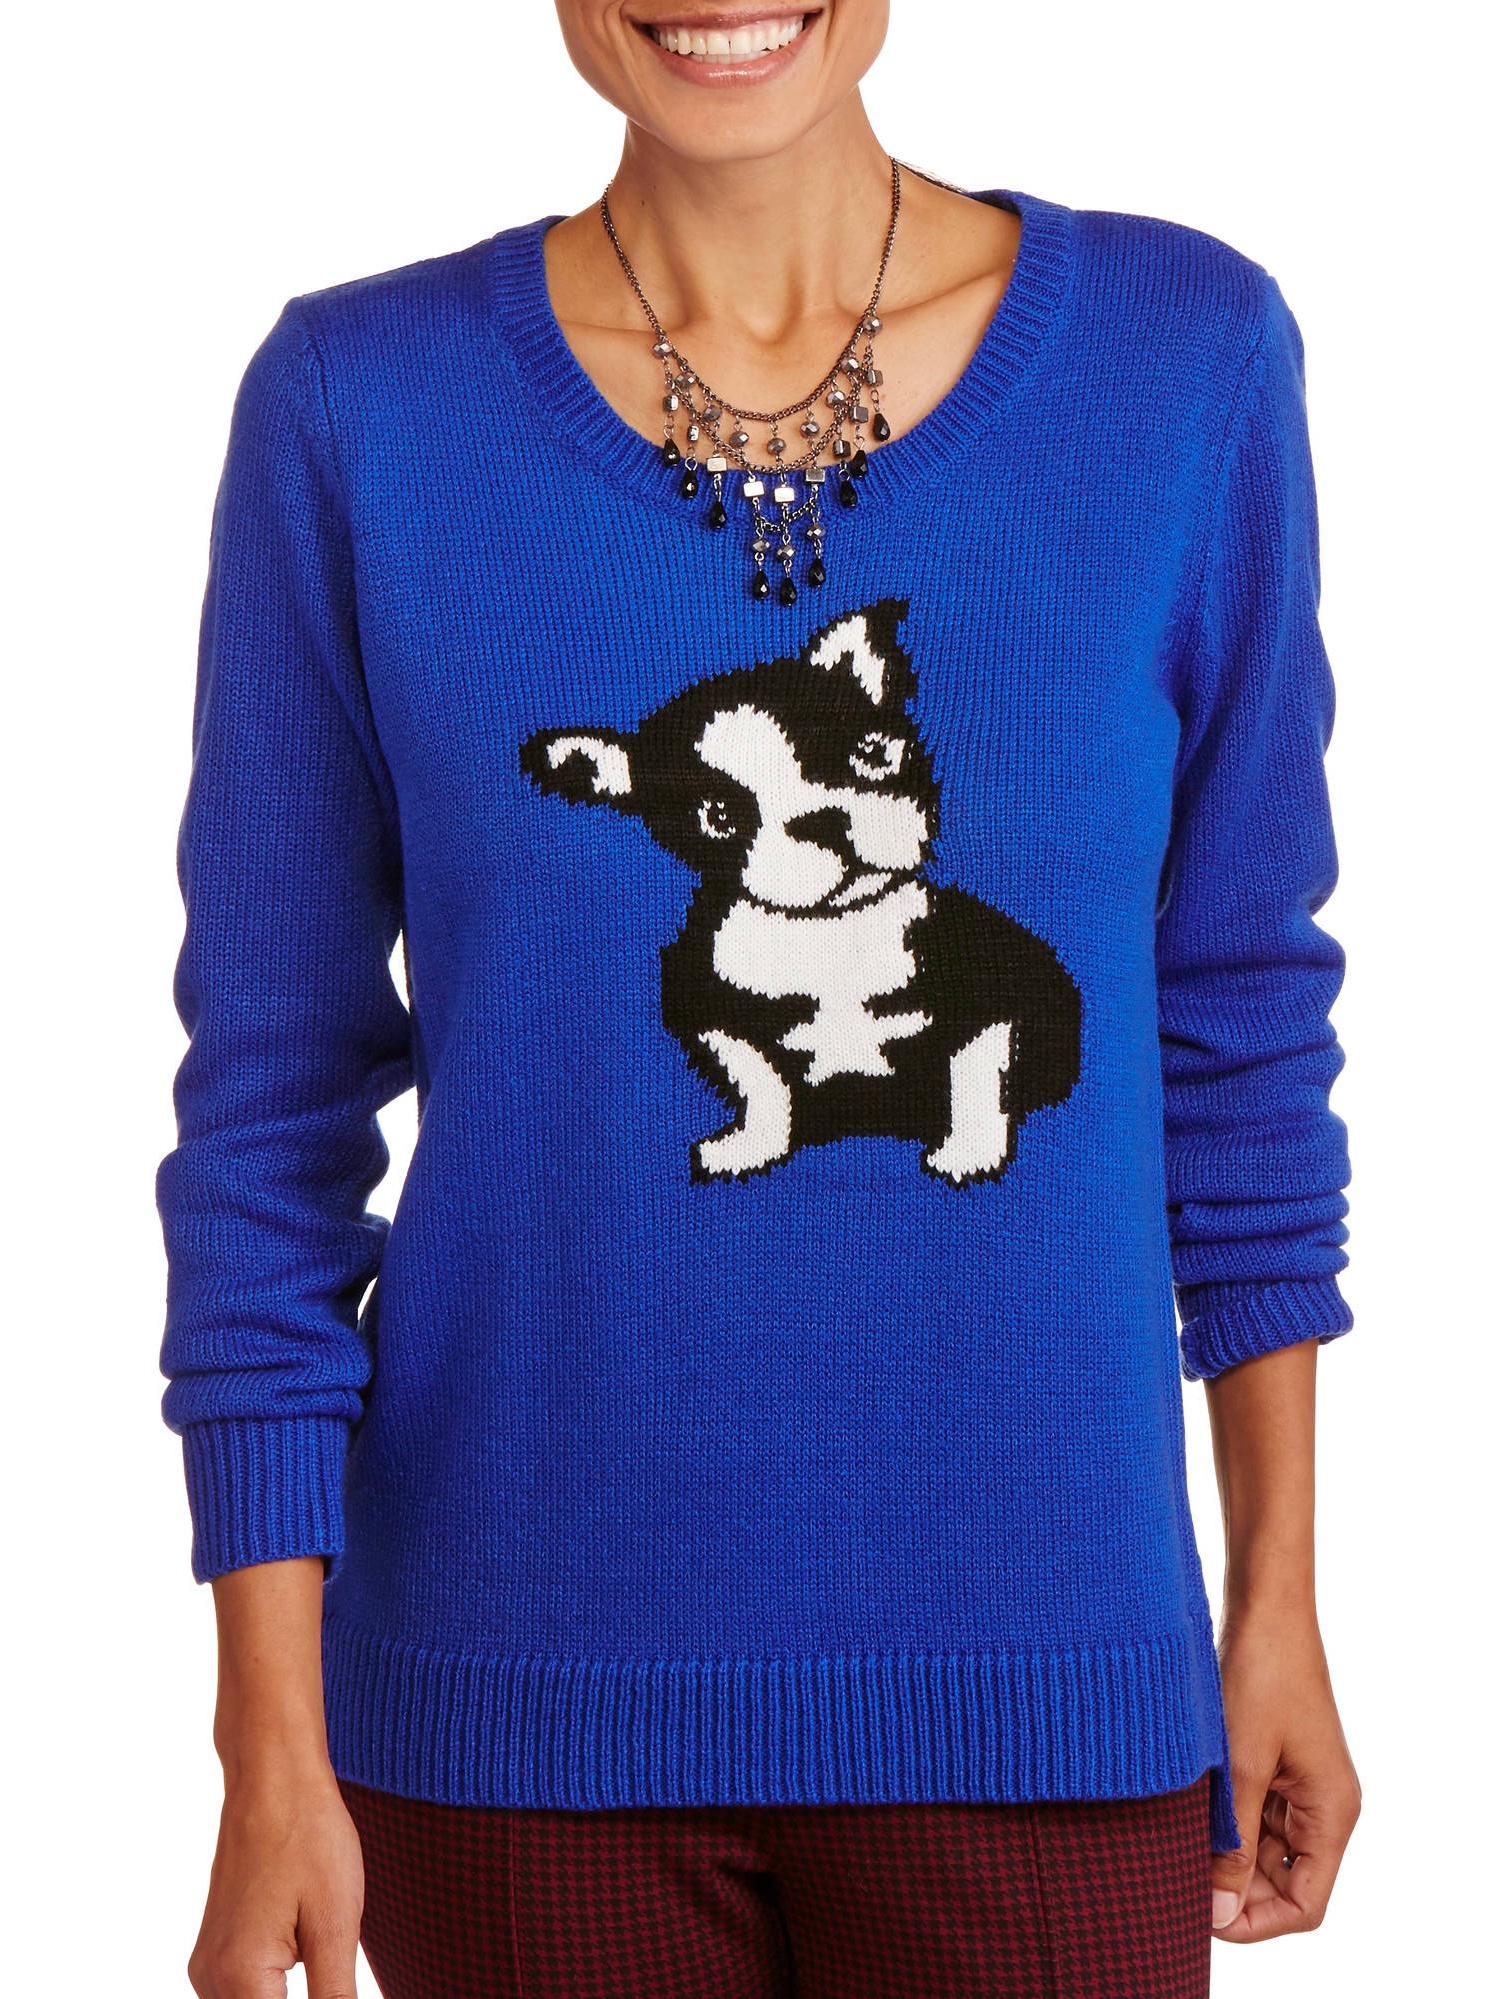 Women's Critter Graphic Sweater - image 1 of 2